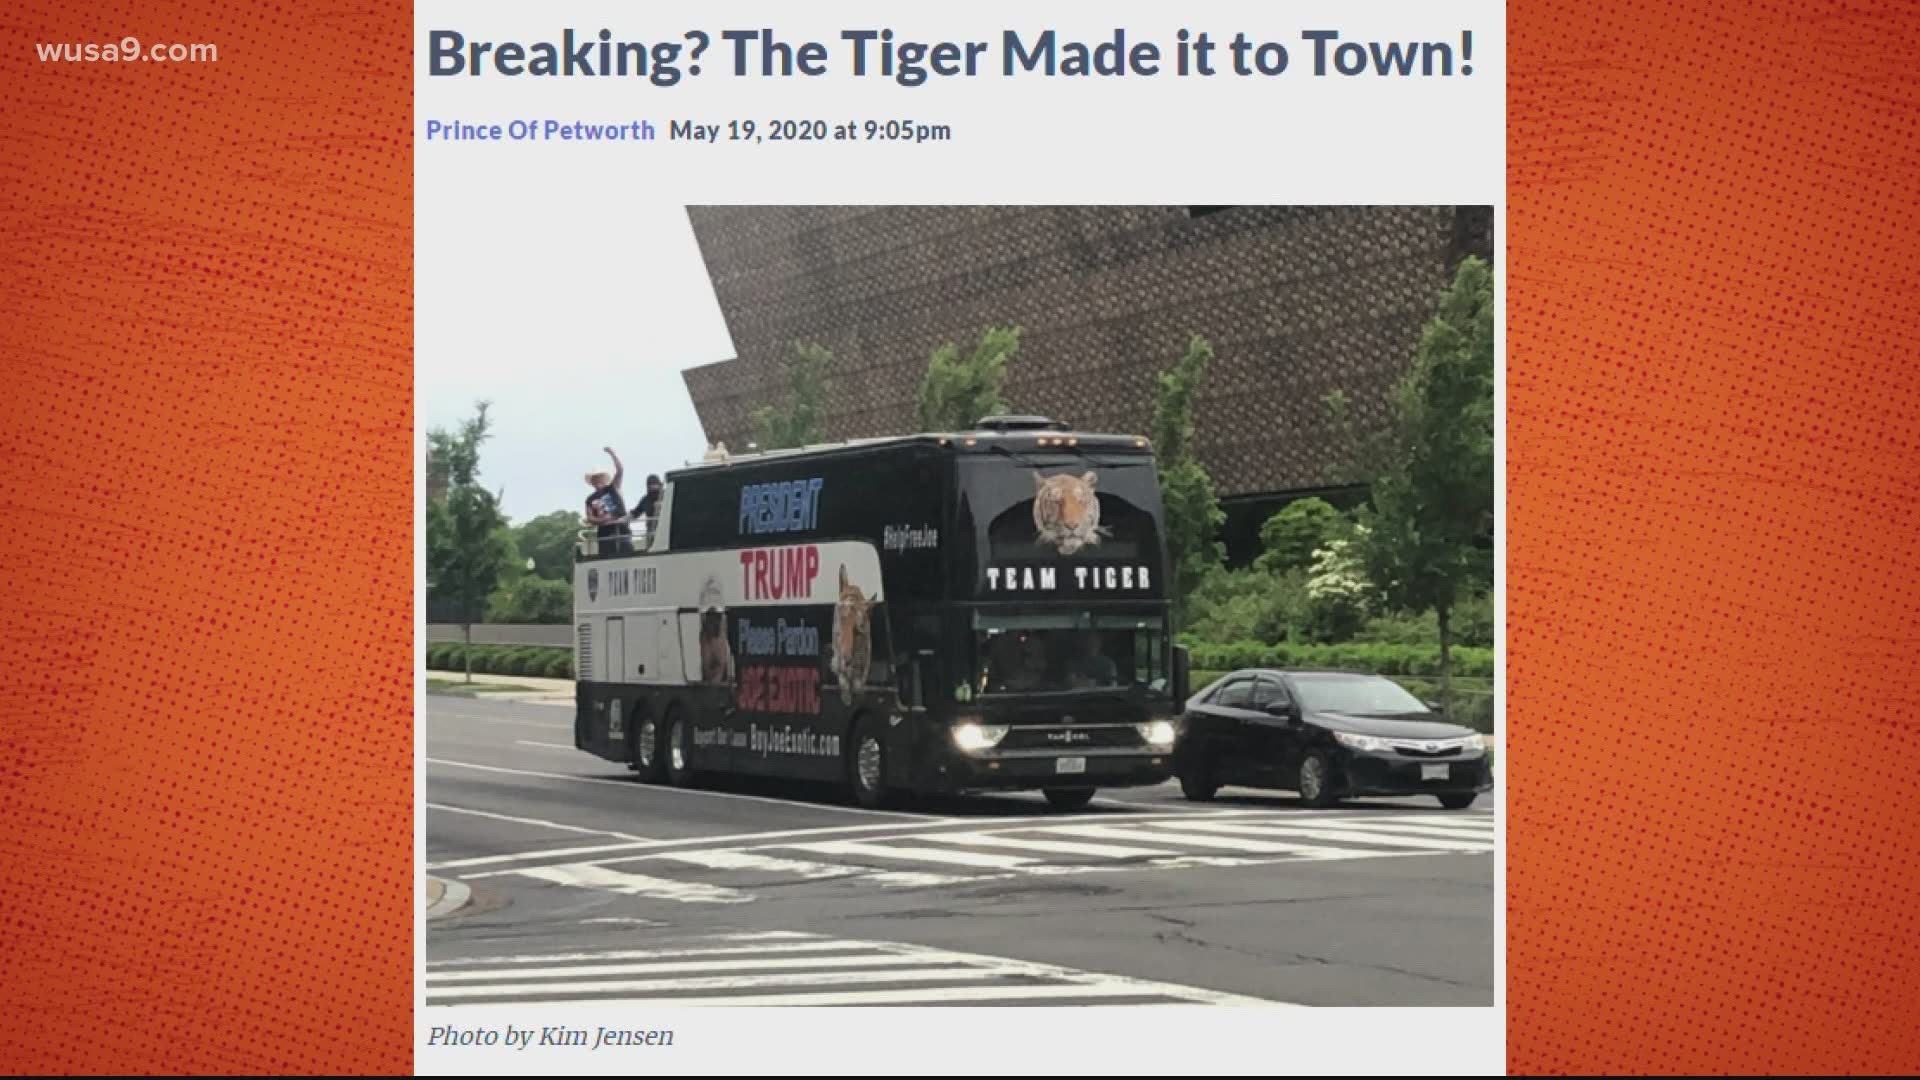 Team Tiger is rallying to get Joe Exotic from the Tiger King a presidential pardon.